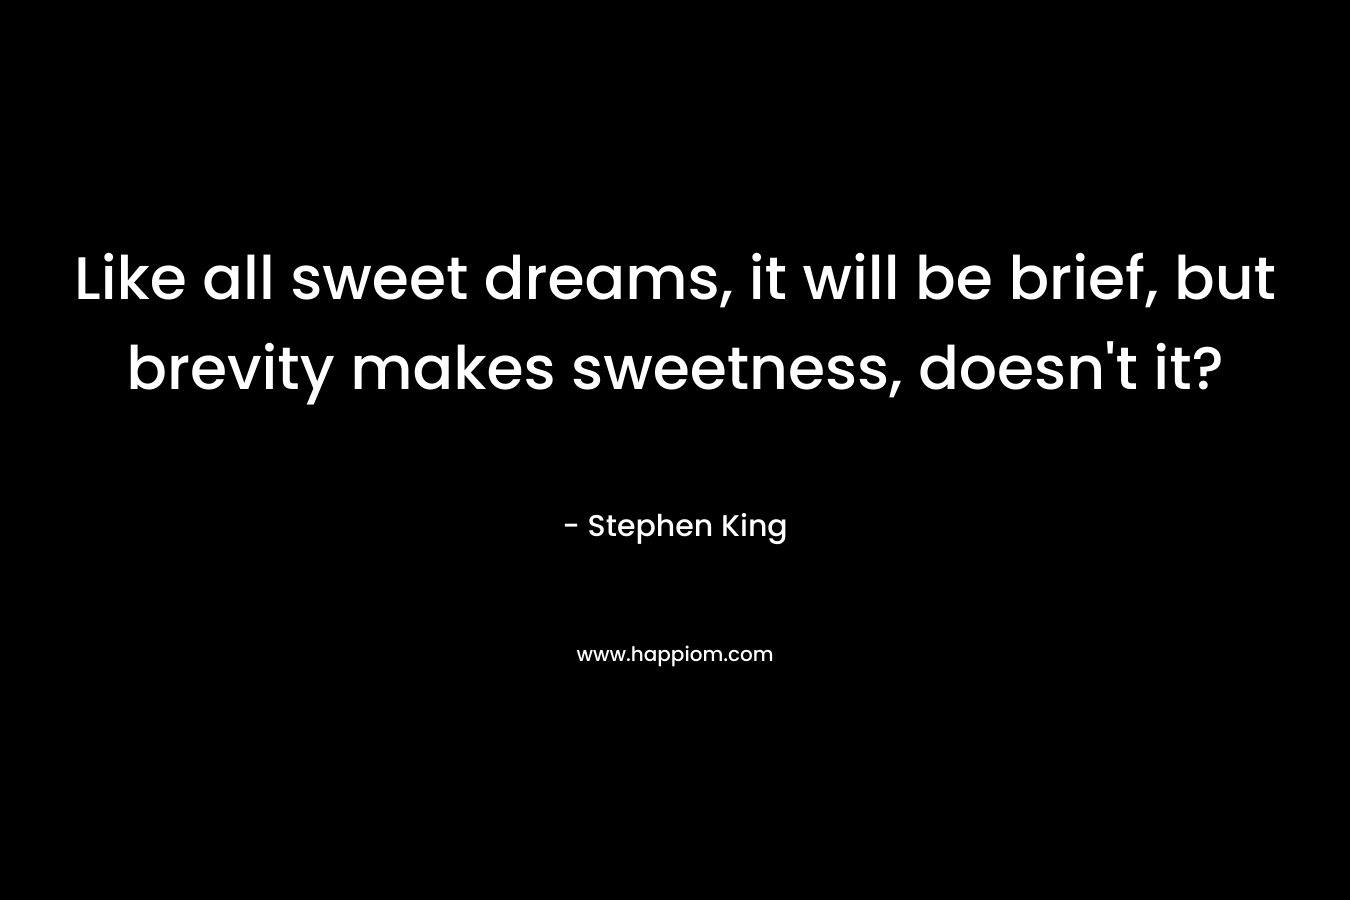 Like all sweet dreams, it will be brief, but brevity makes sweetness, doesn't it?